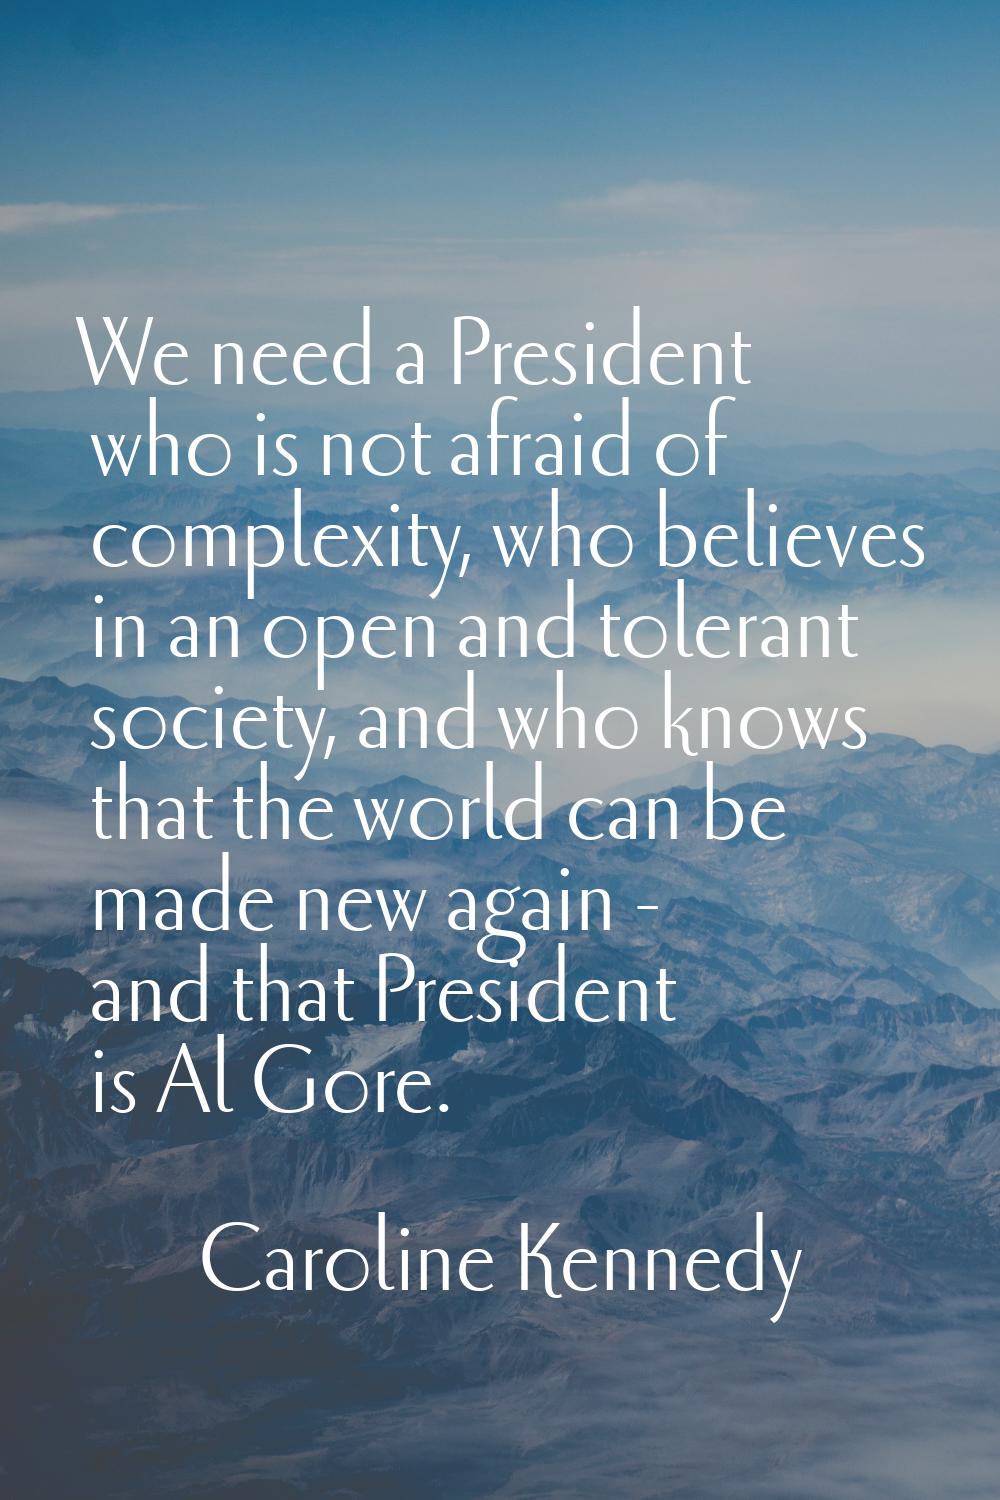 We need a President who is not afraid of complexity, who believes in an open and tolerant society, 